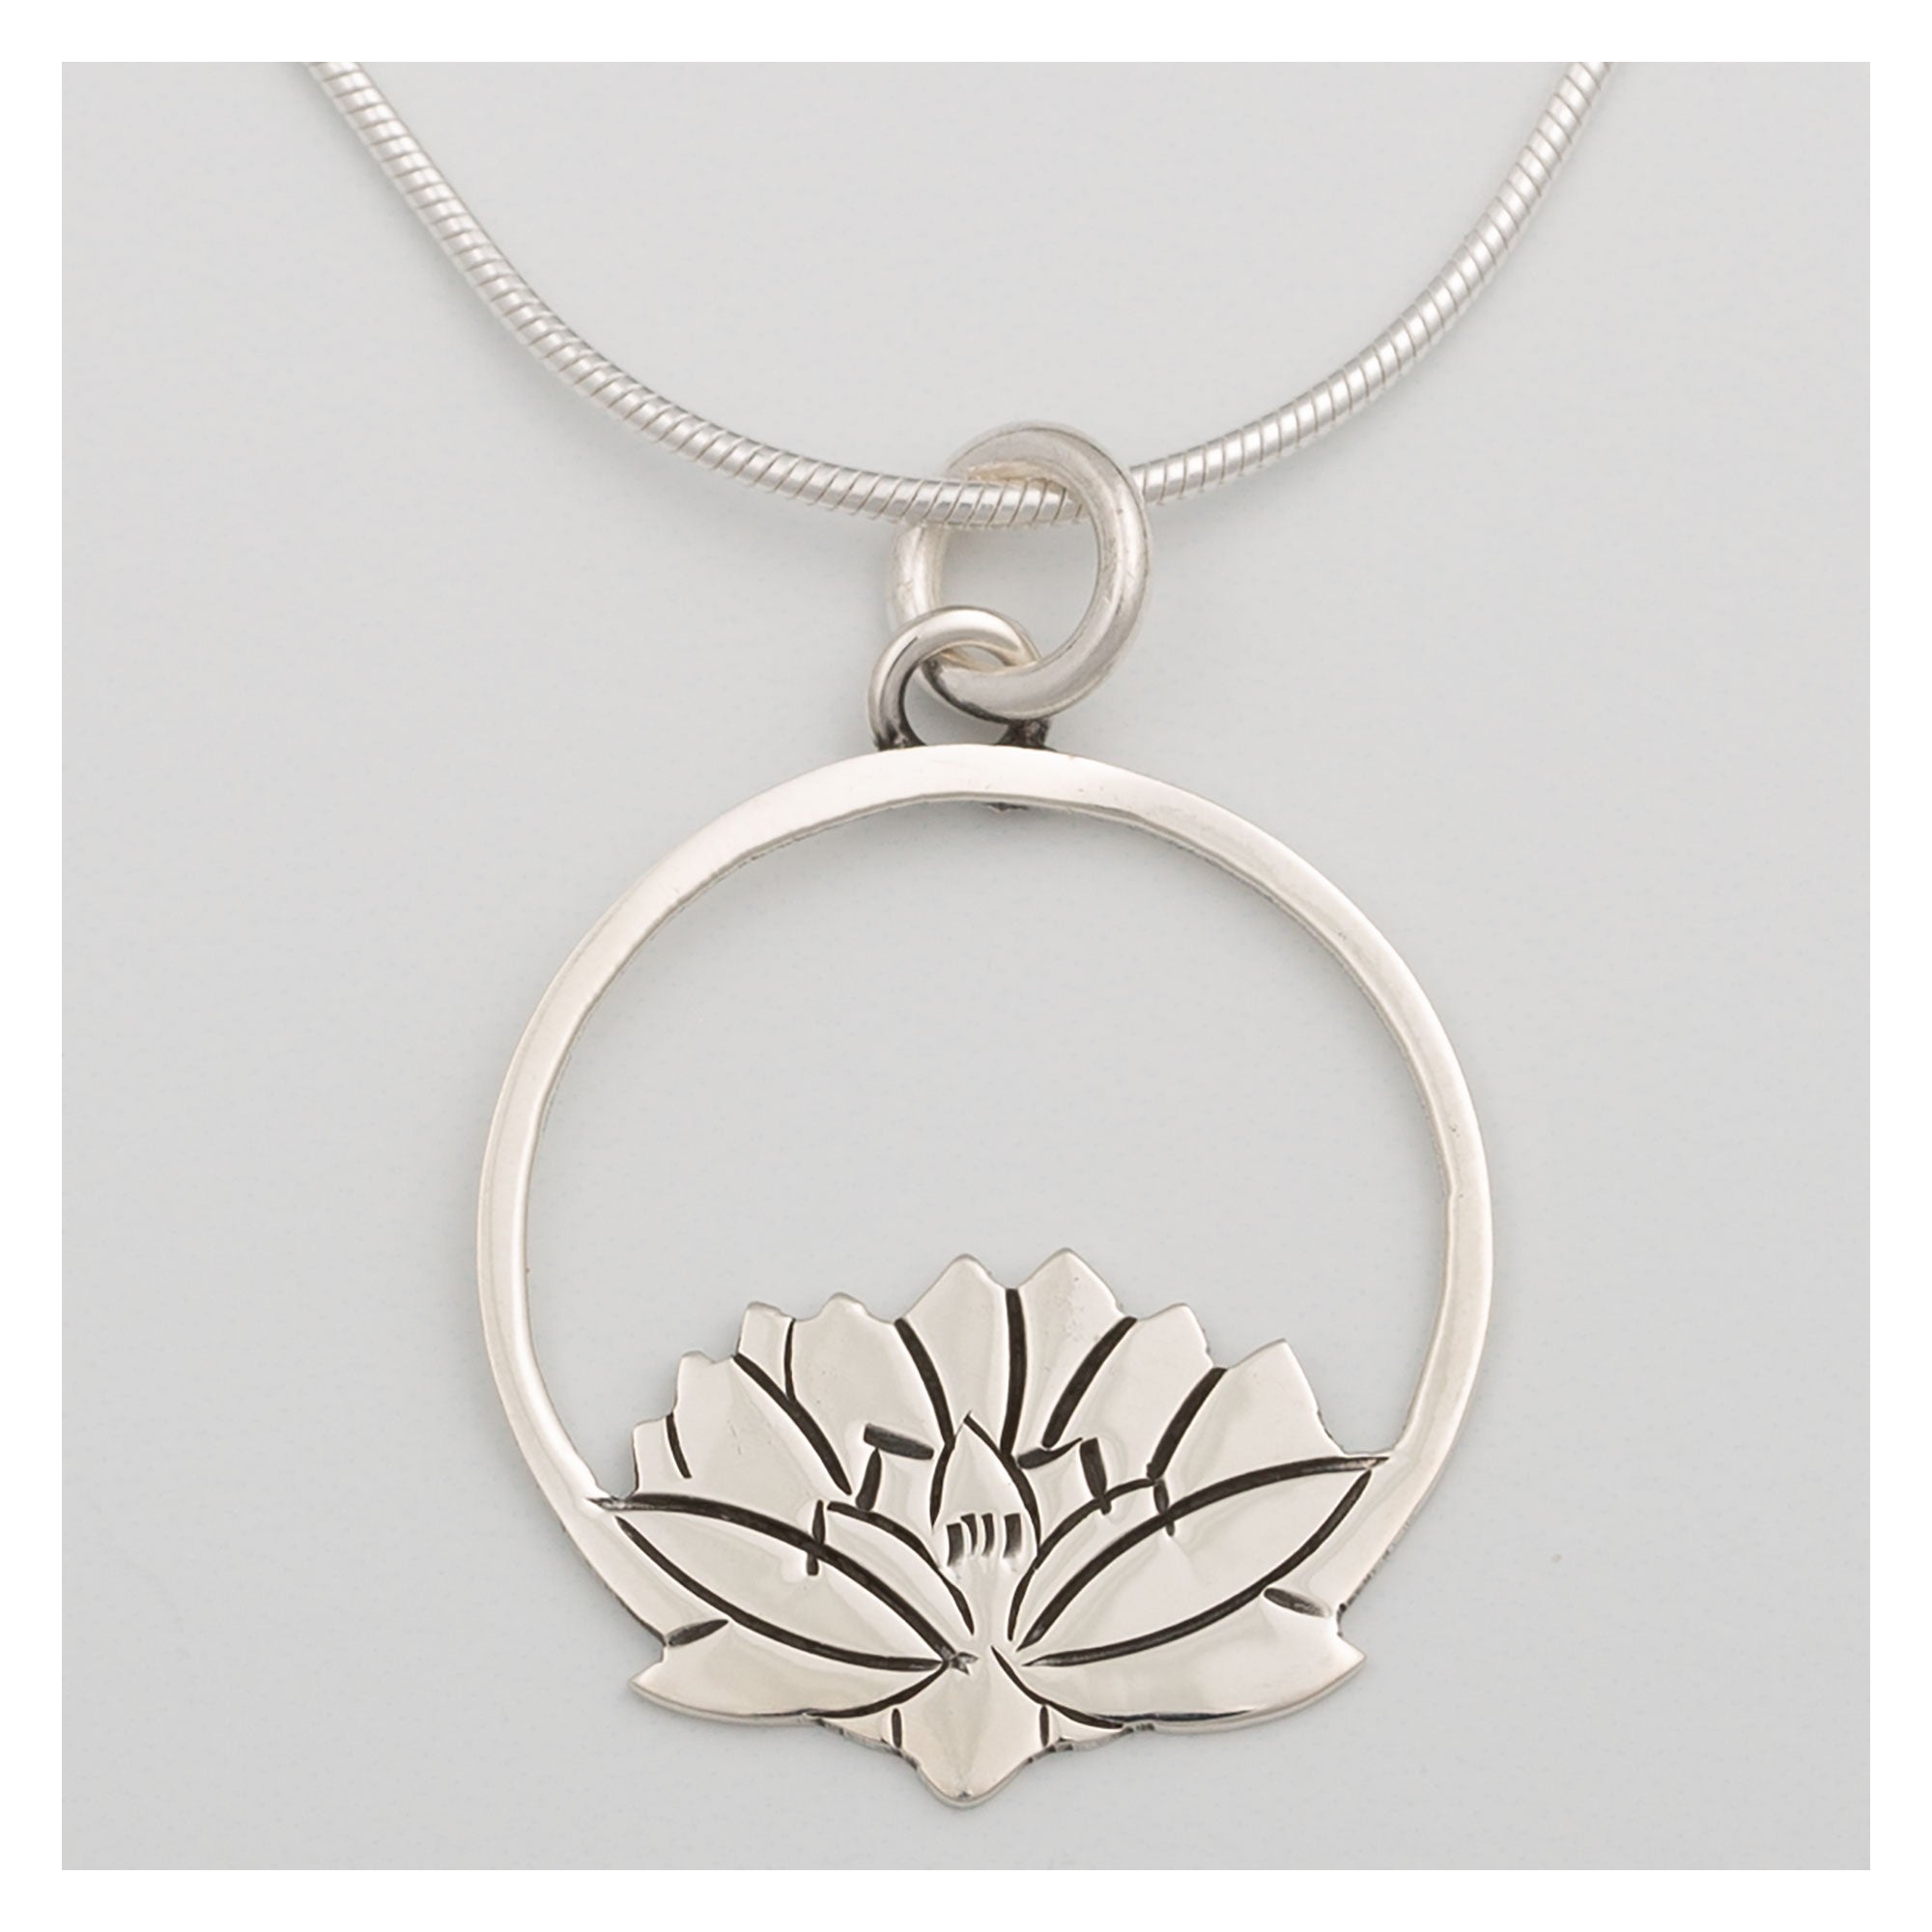 Blooming Flowers Sterling Necklace - Water Lily - Pendant Only